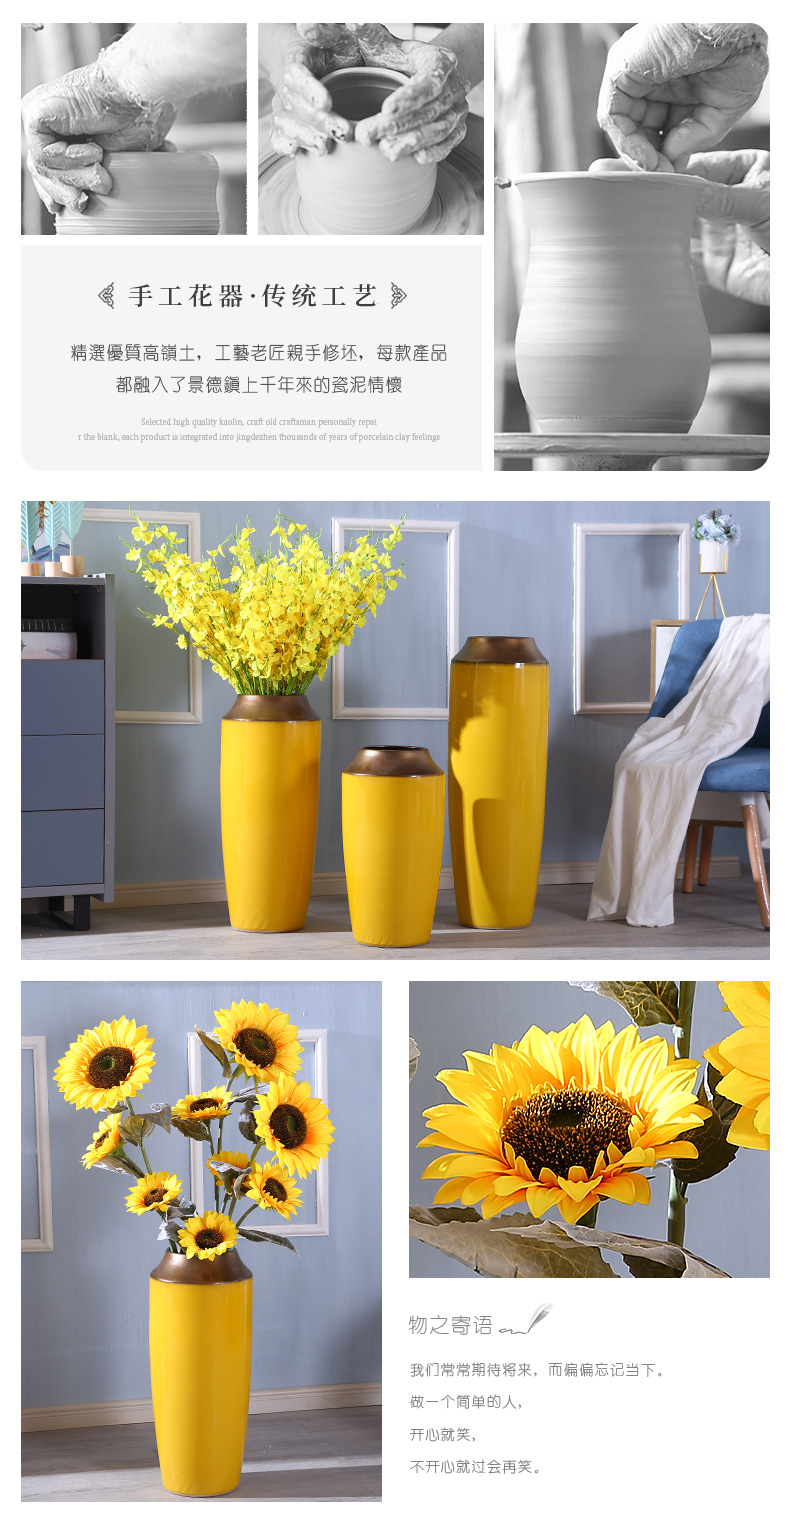 European Nordic light key-2 luxury office ceramic vase furnishing articles yellow creative contracted sunflowers ground decoration